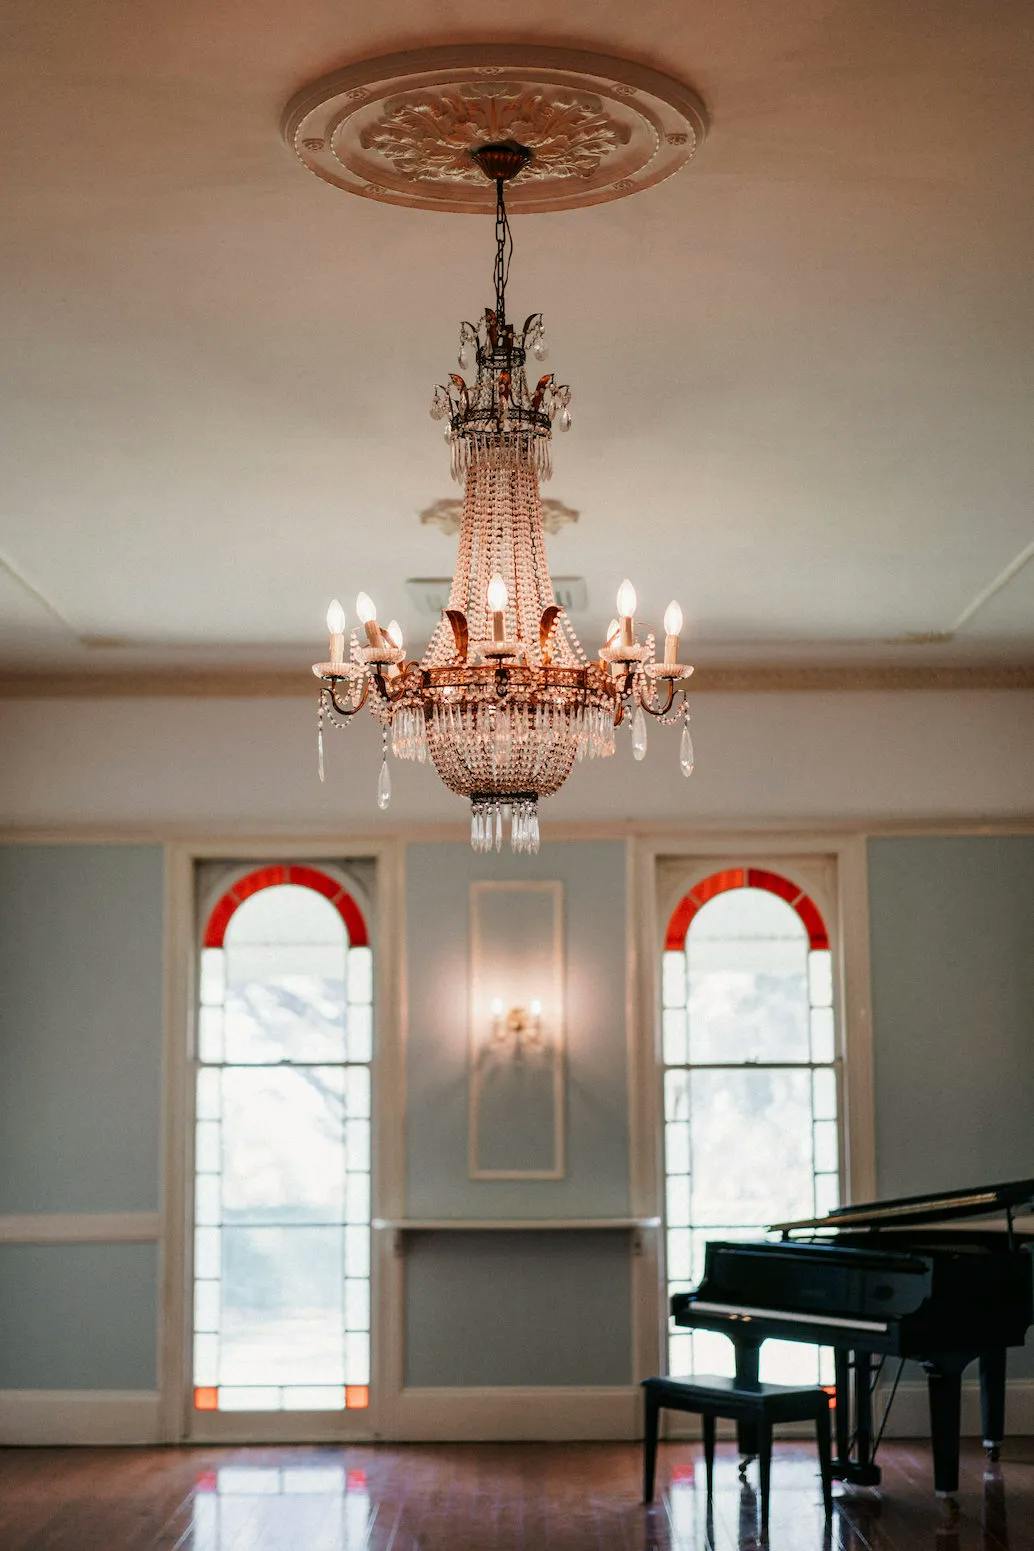 An elegant room with a grand crystal chandelier hanging from the ceiling. The room features large windows with red and white accents, illuminating the sparse space. In the corner, there is a black grand piano. The floor is polished wood.